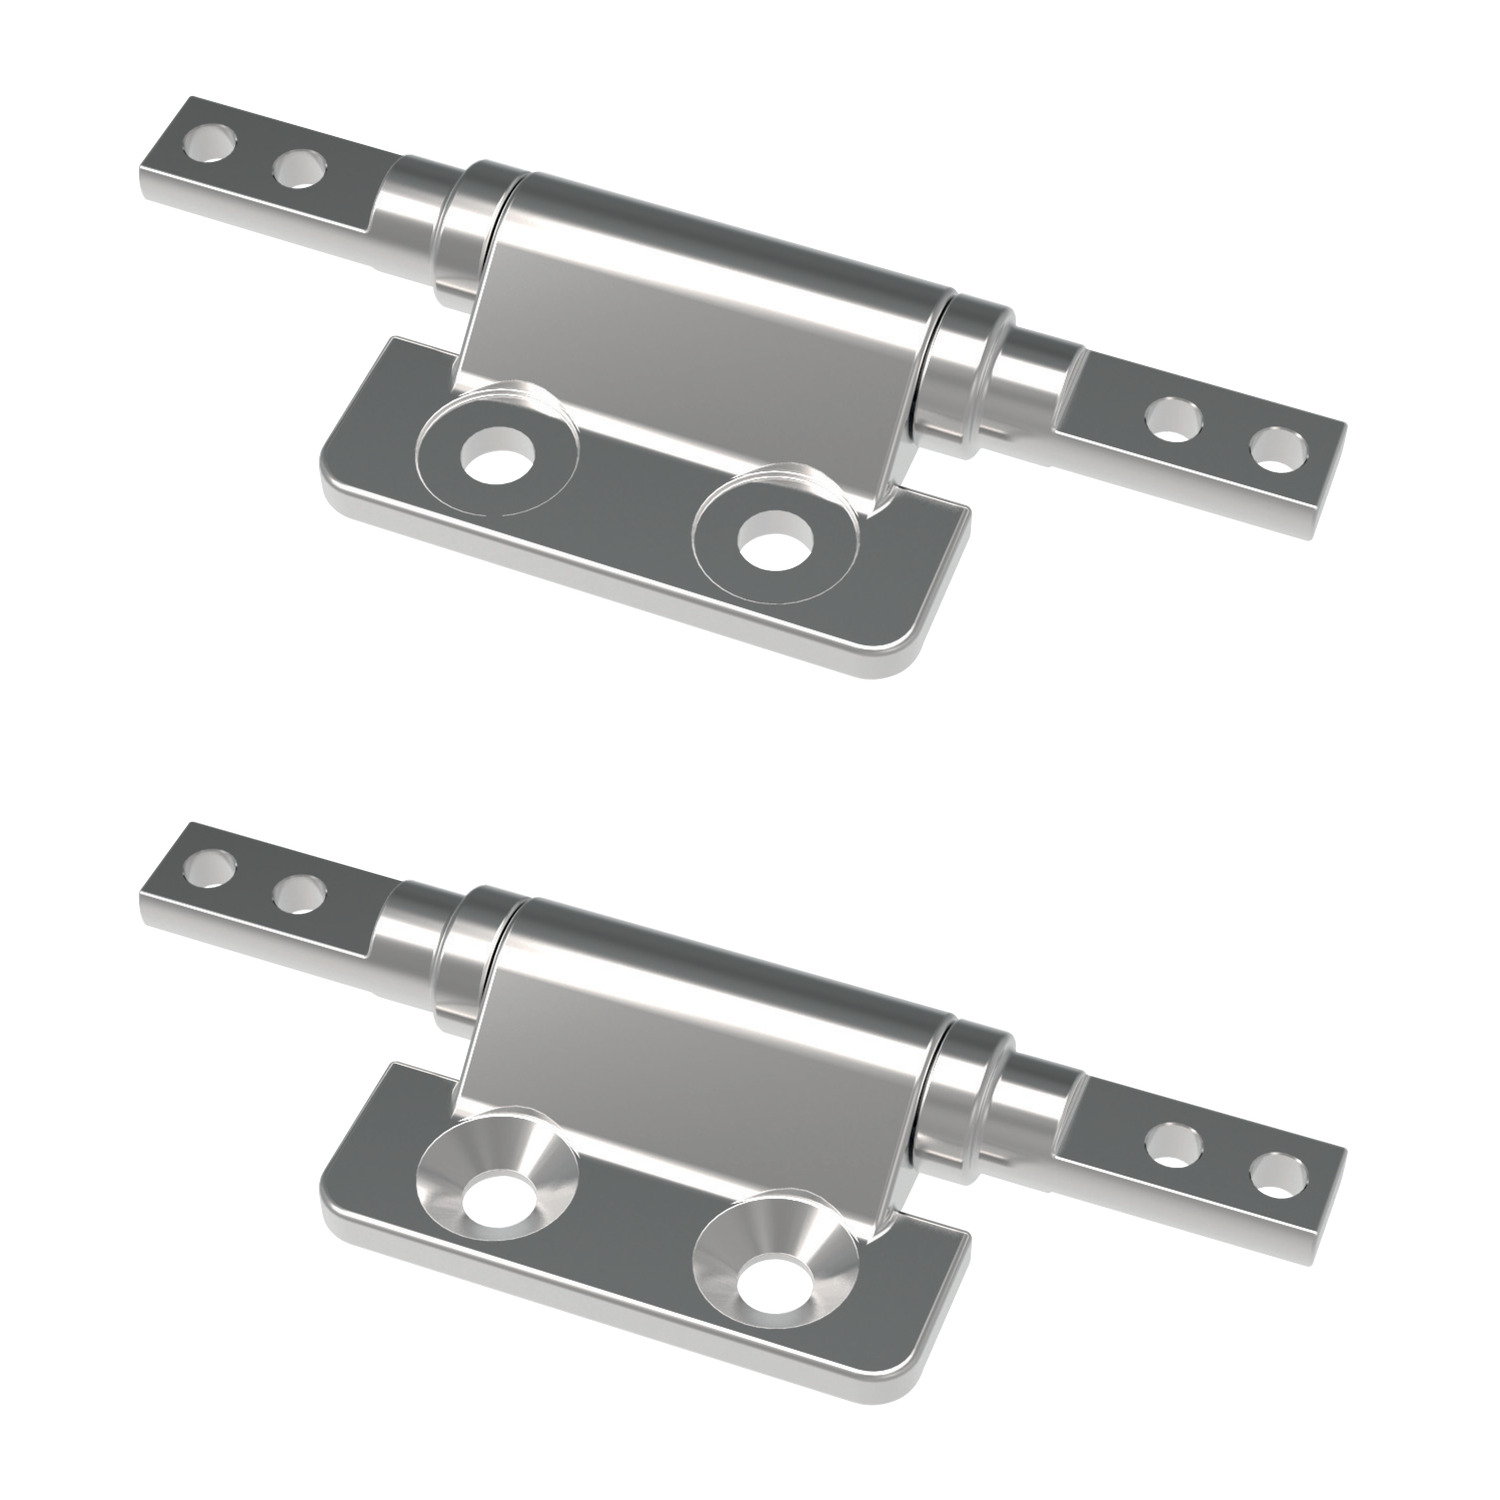 Friction Hinges Asymmetric torque friction hinges from 0,0 - 3,4 Nm. Counter sunk and plain bore.